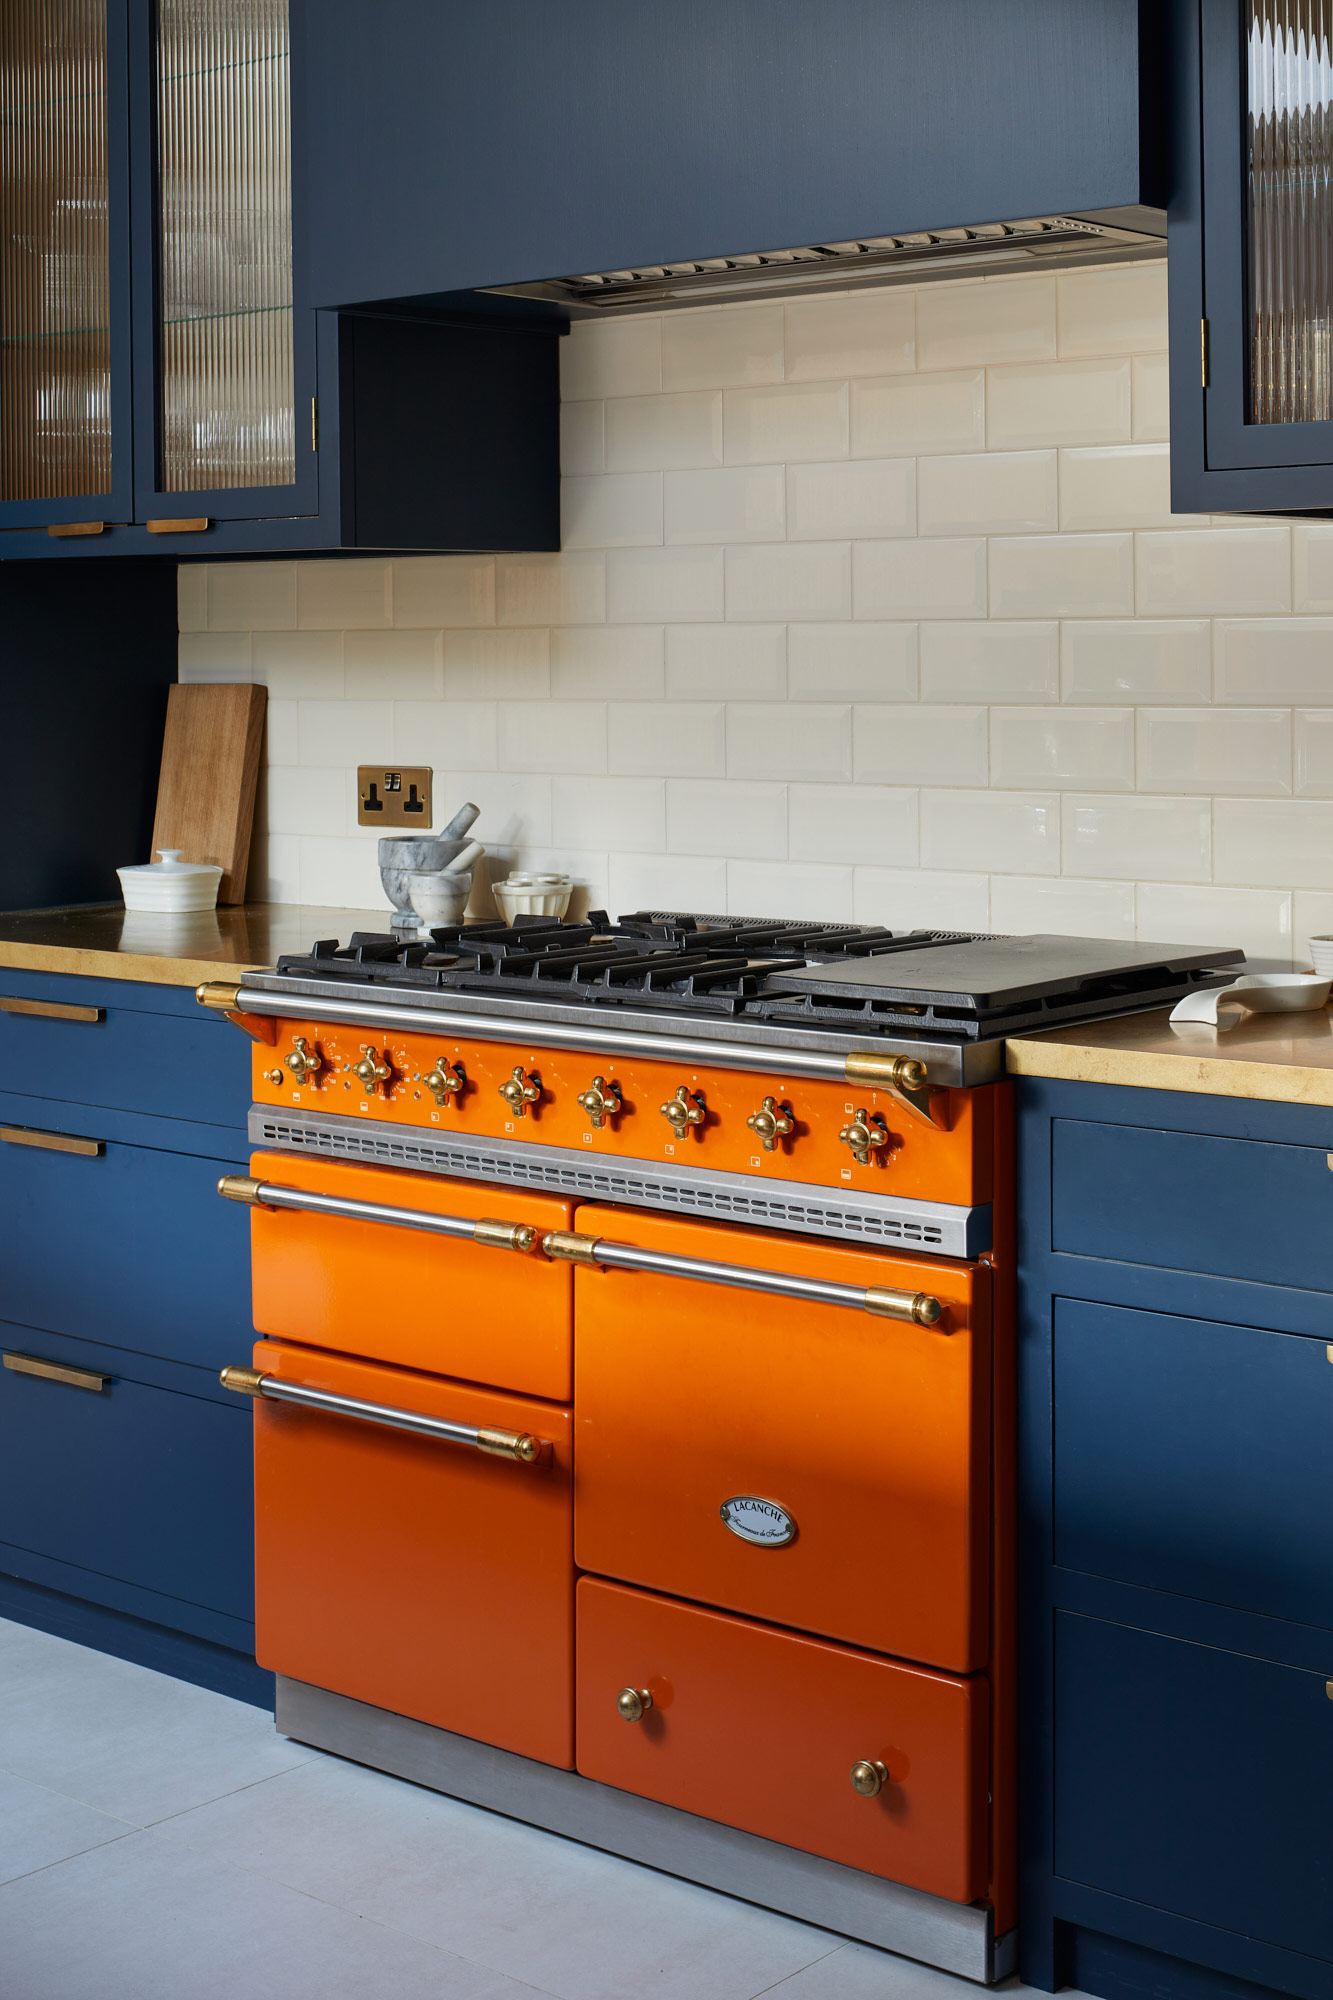 Bright orange Lacanche range cooker in bespoke kitchen by The Main Company